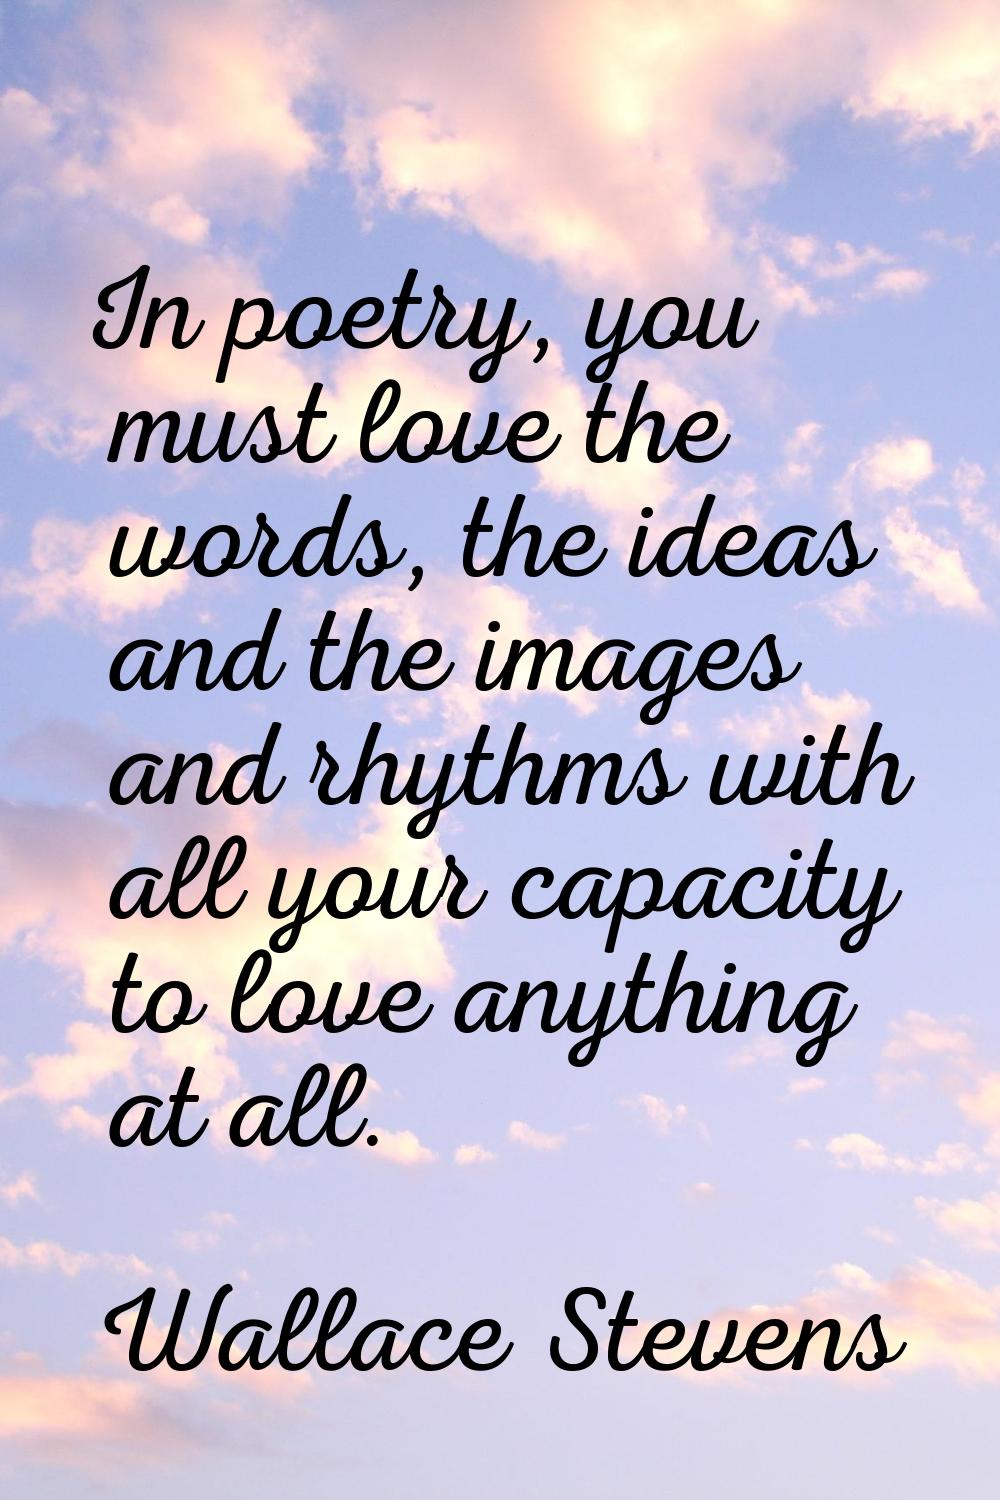 In poetry, you must love the words, the ideas and the images and rhythms with all your capacity to 